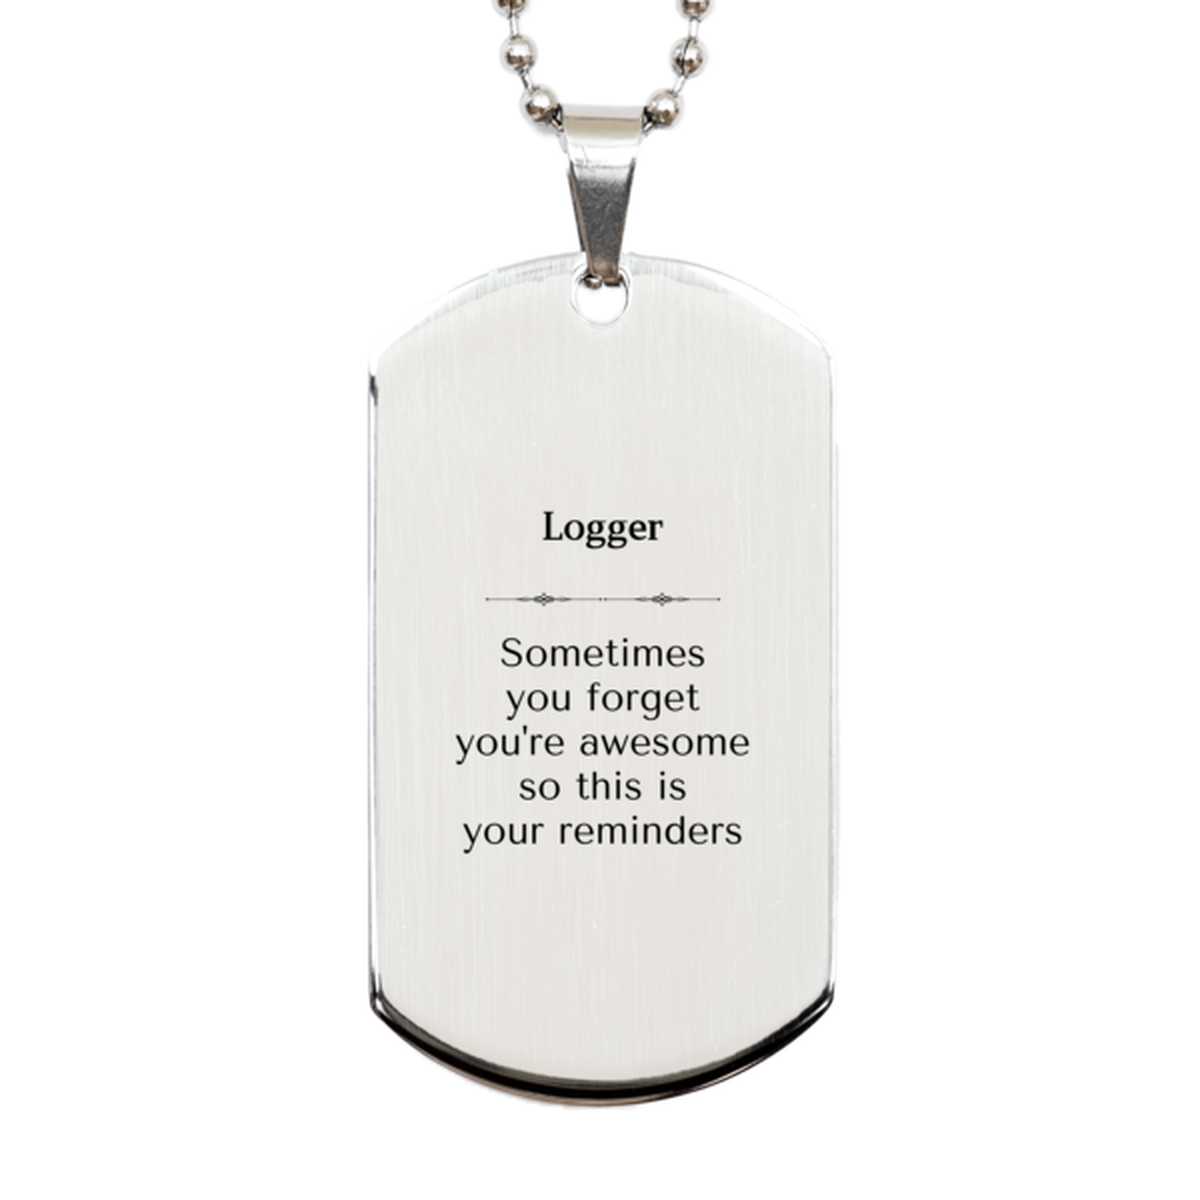 Sentimental Logger Silver Dog Tag, Logger Sometimes you forget you're awesome so this is your reminders, Graduation Christmas Birthday Gifts for Logger, Men, Women, Coworkers